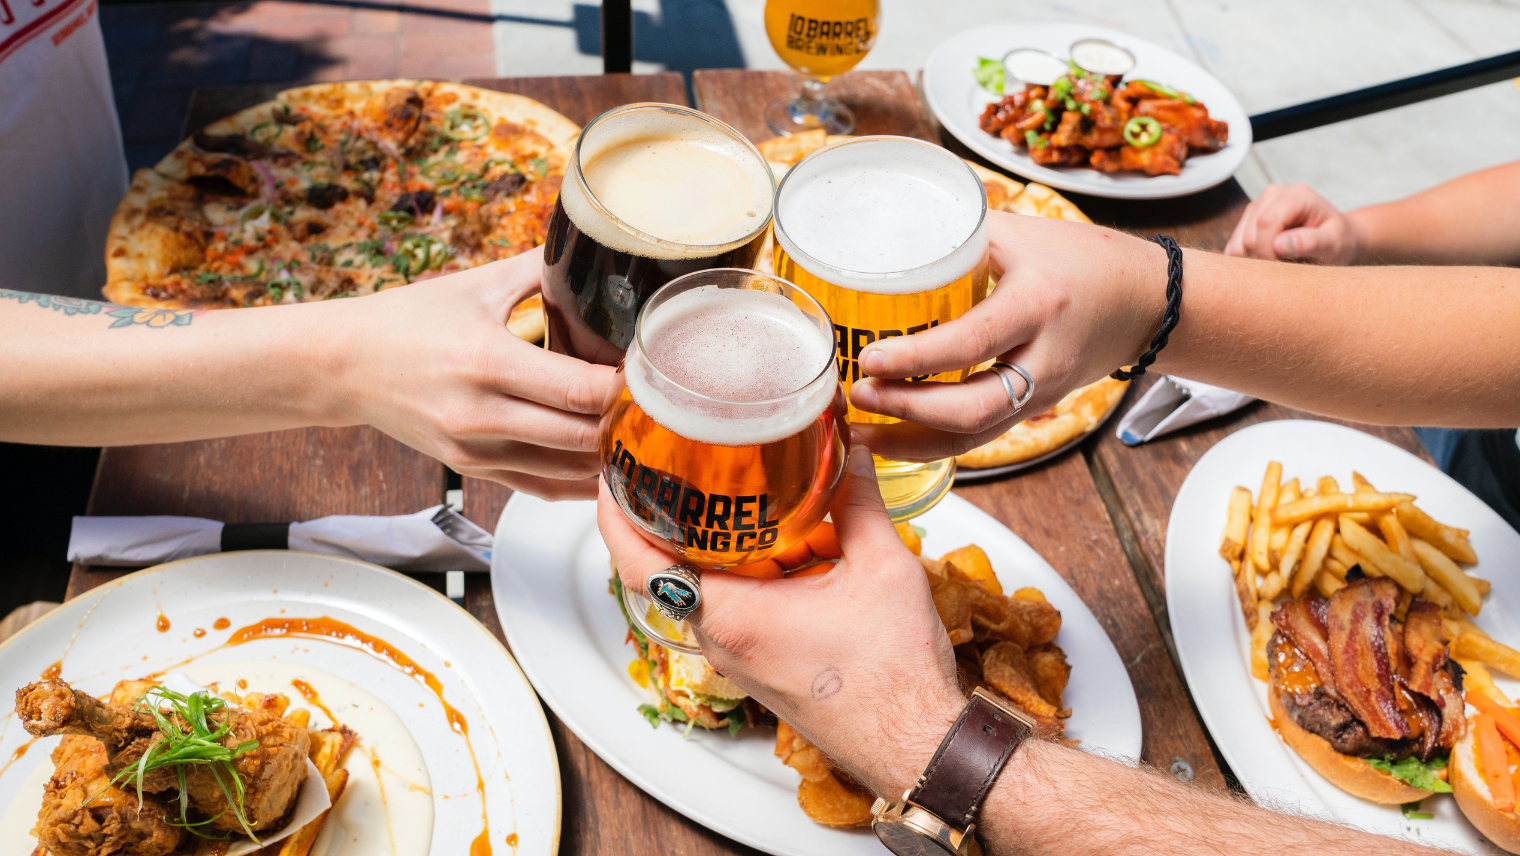 Image of 3 people holding beers, with plates of food around them at a table